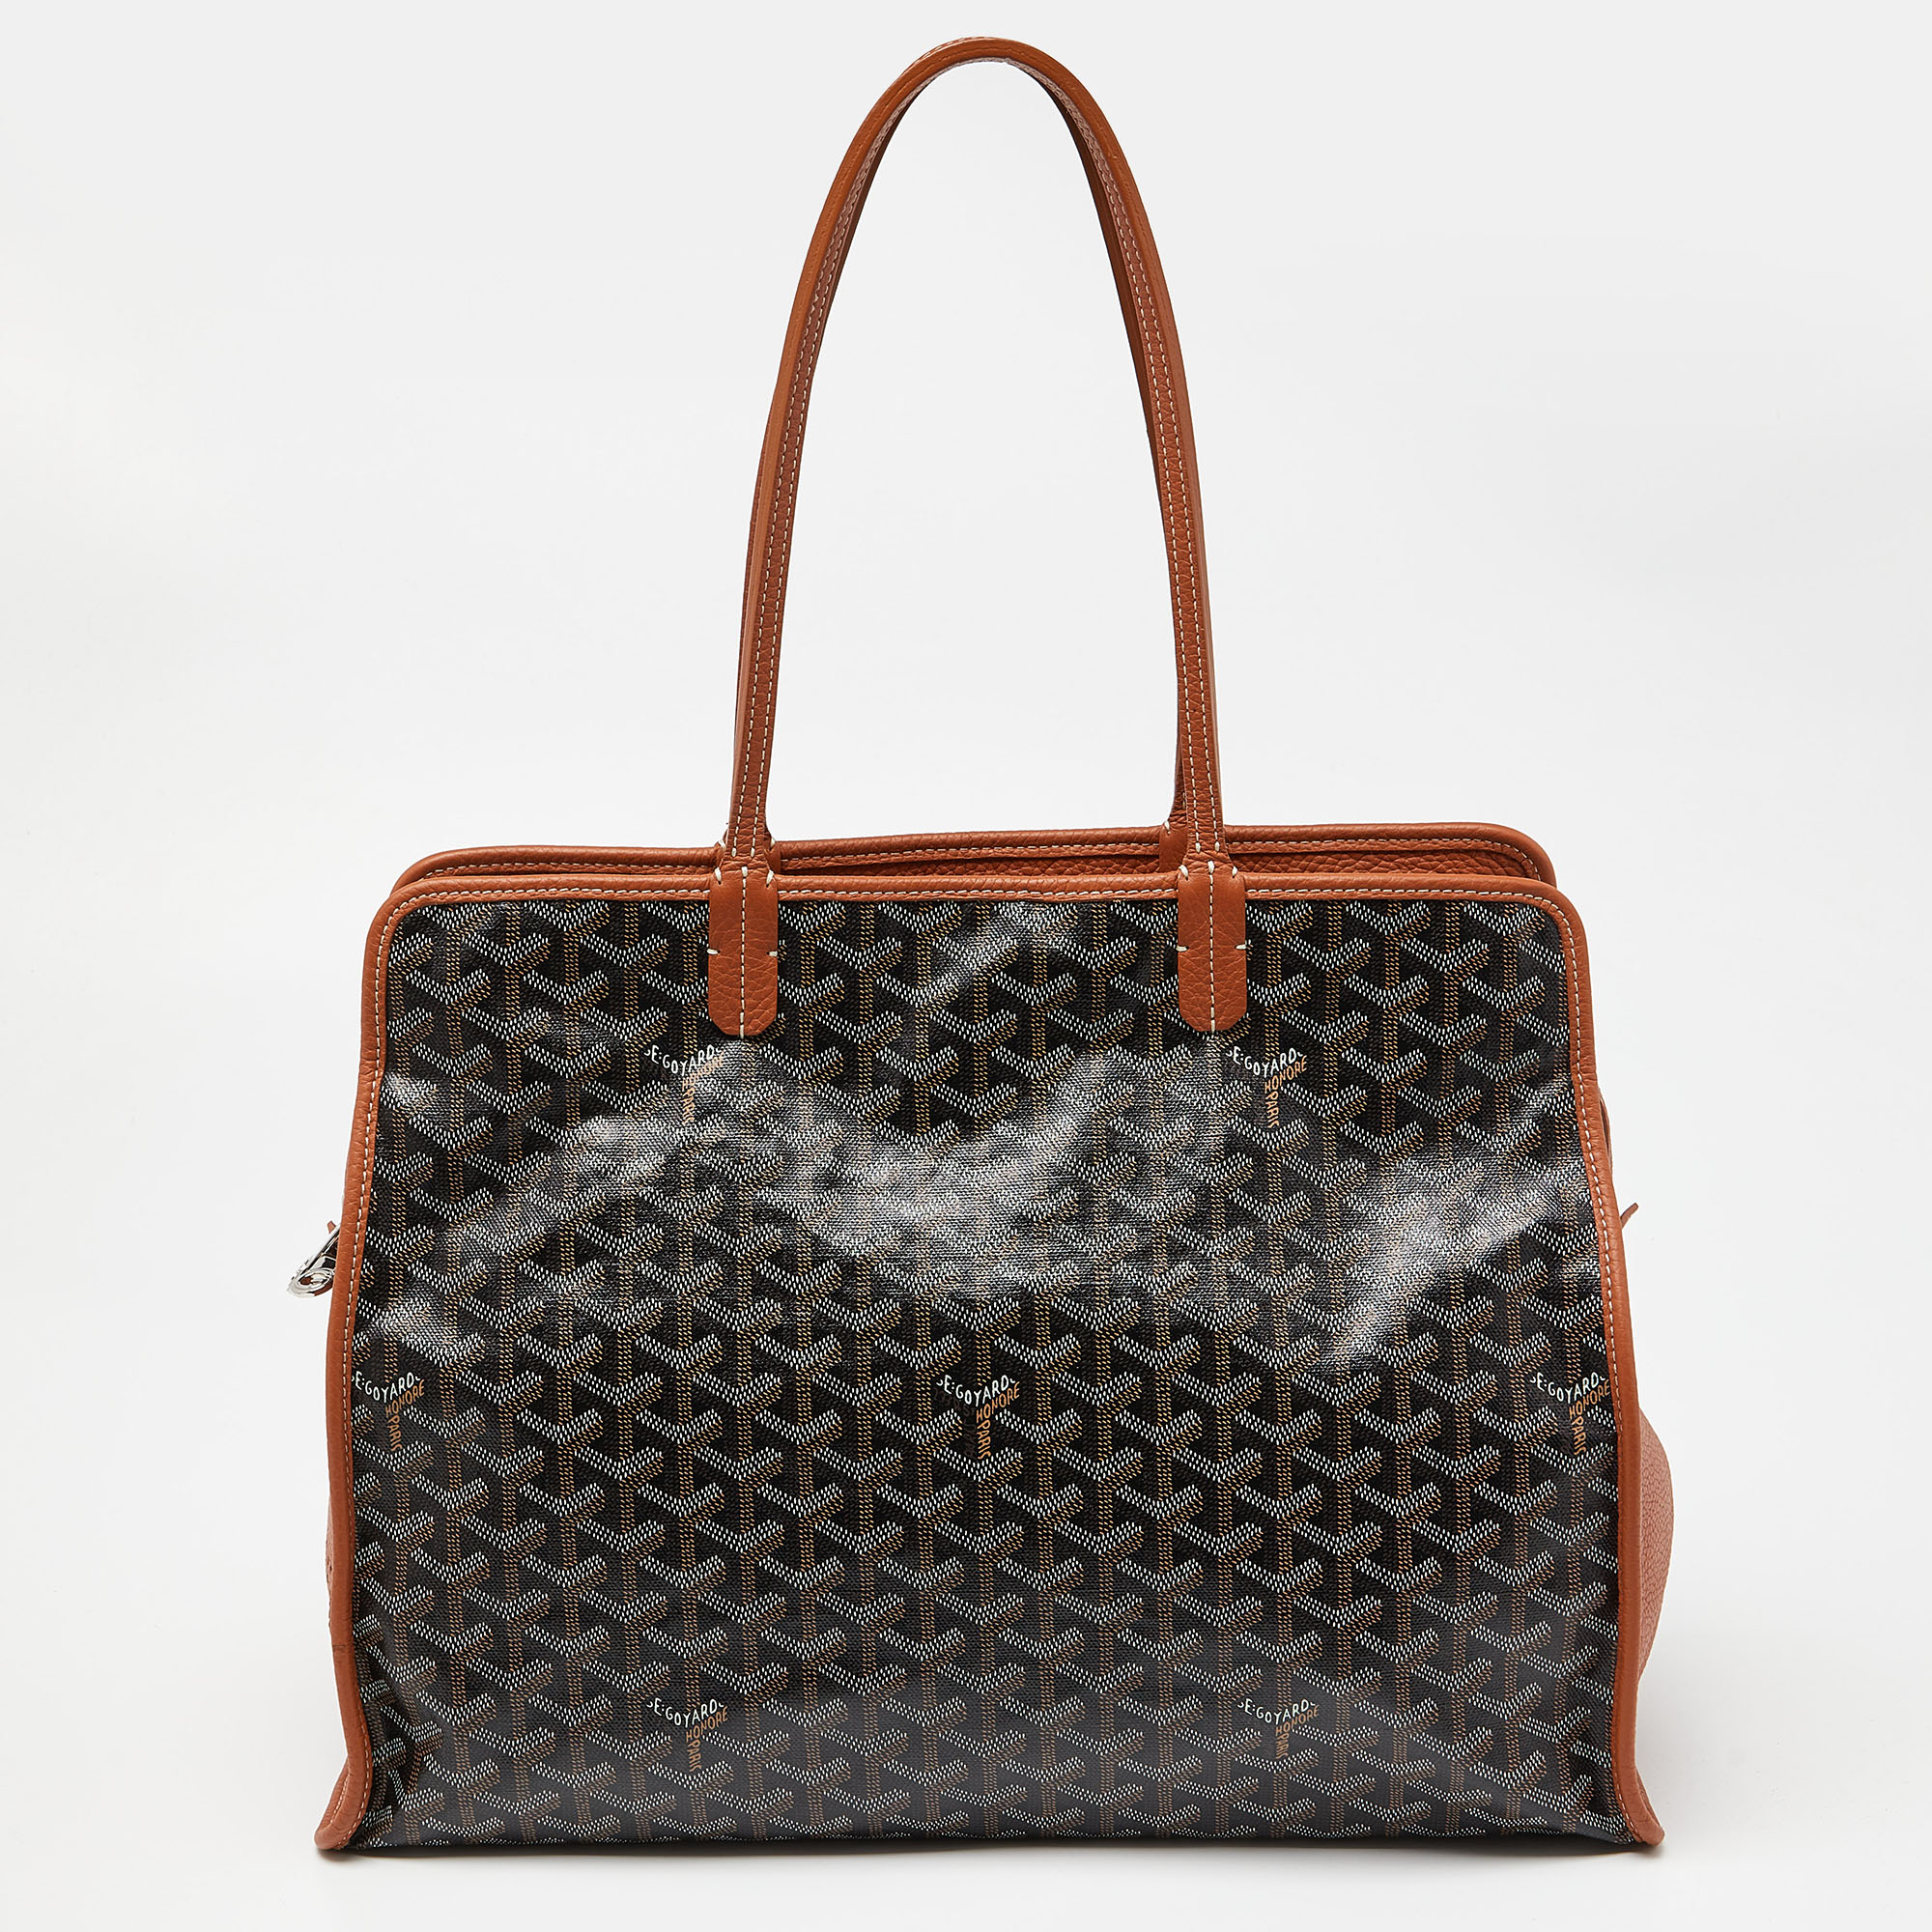 Hardy leather tote